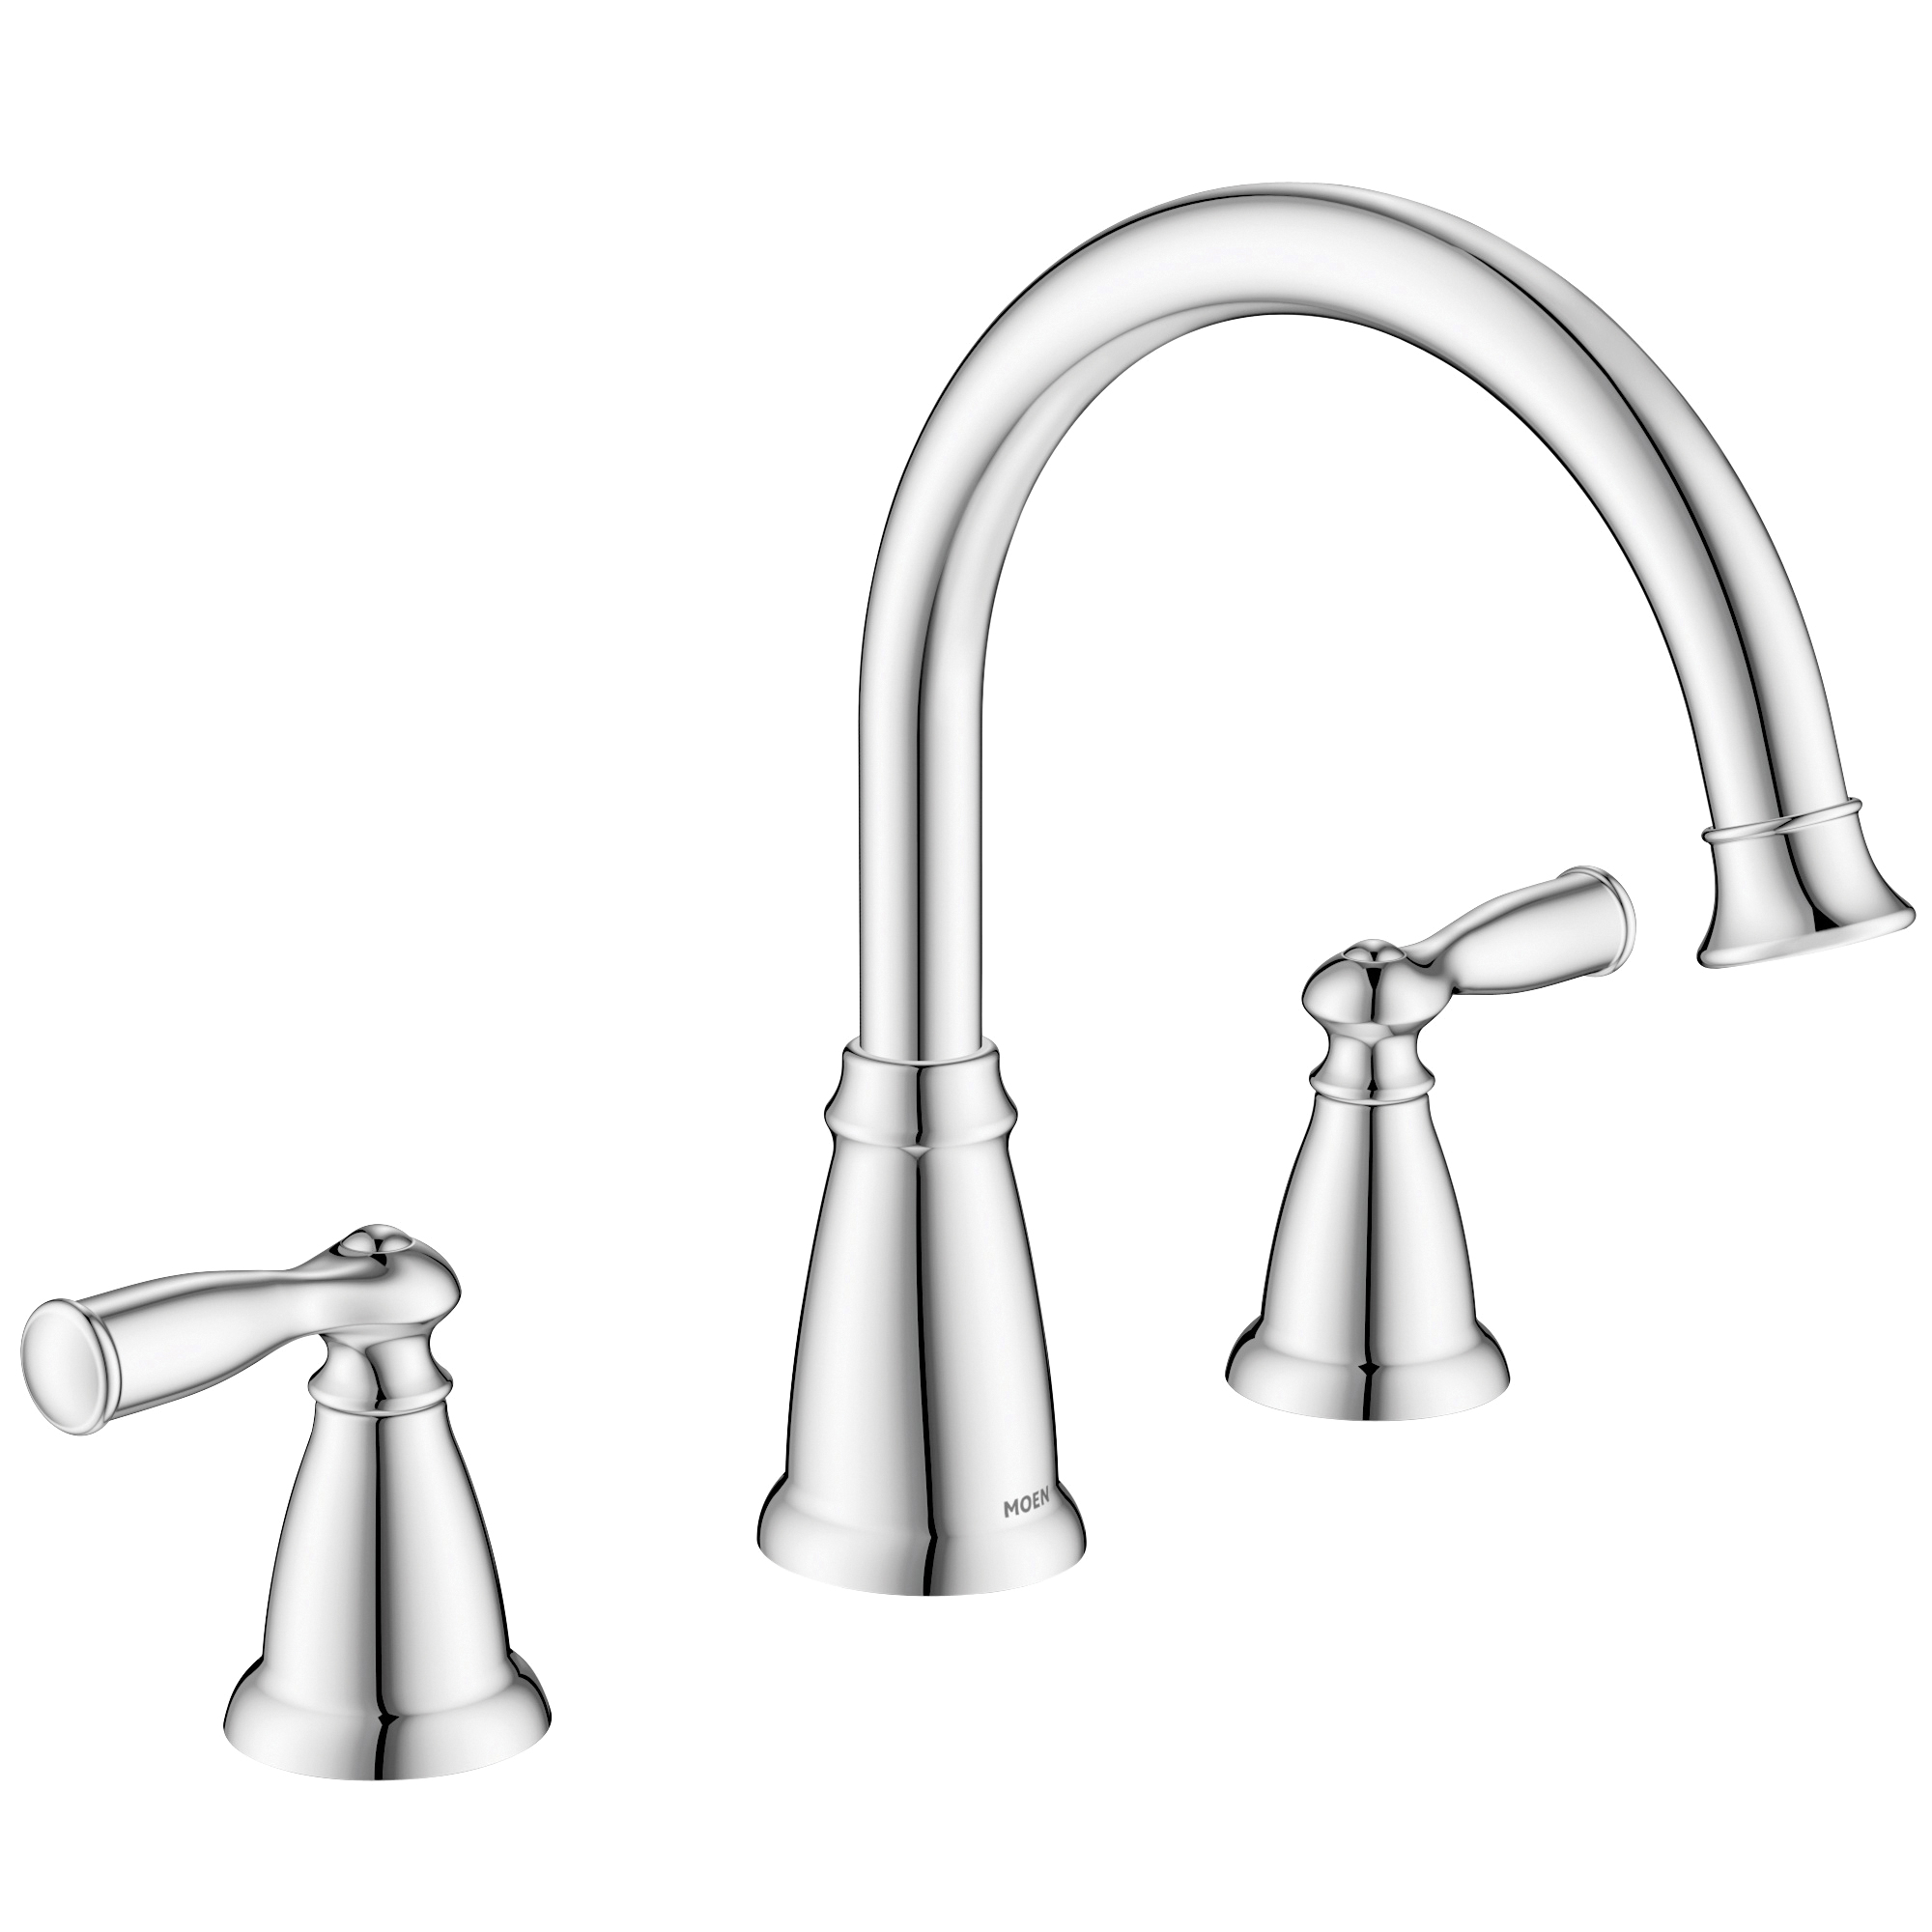 Banbury Series 86924 Tub Faucet, 16 gpm, 2-Faucet Handle, Lever Handle, Stainless Steel, Chrome Plated